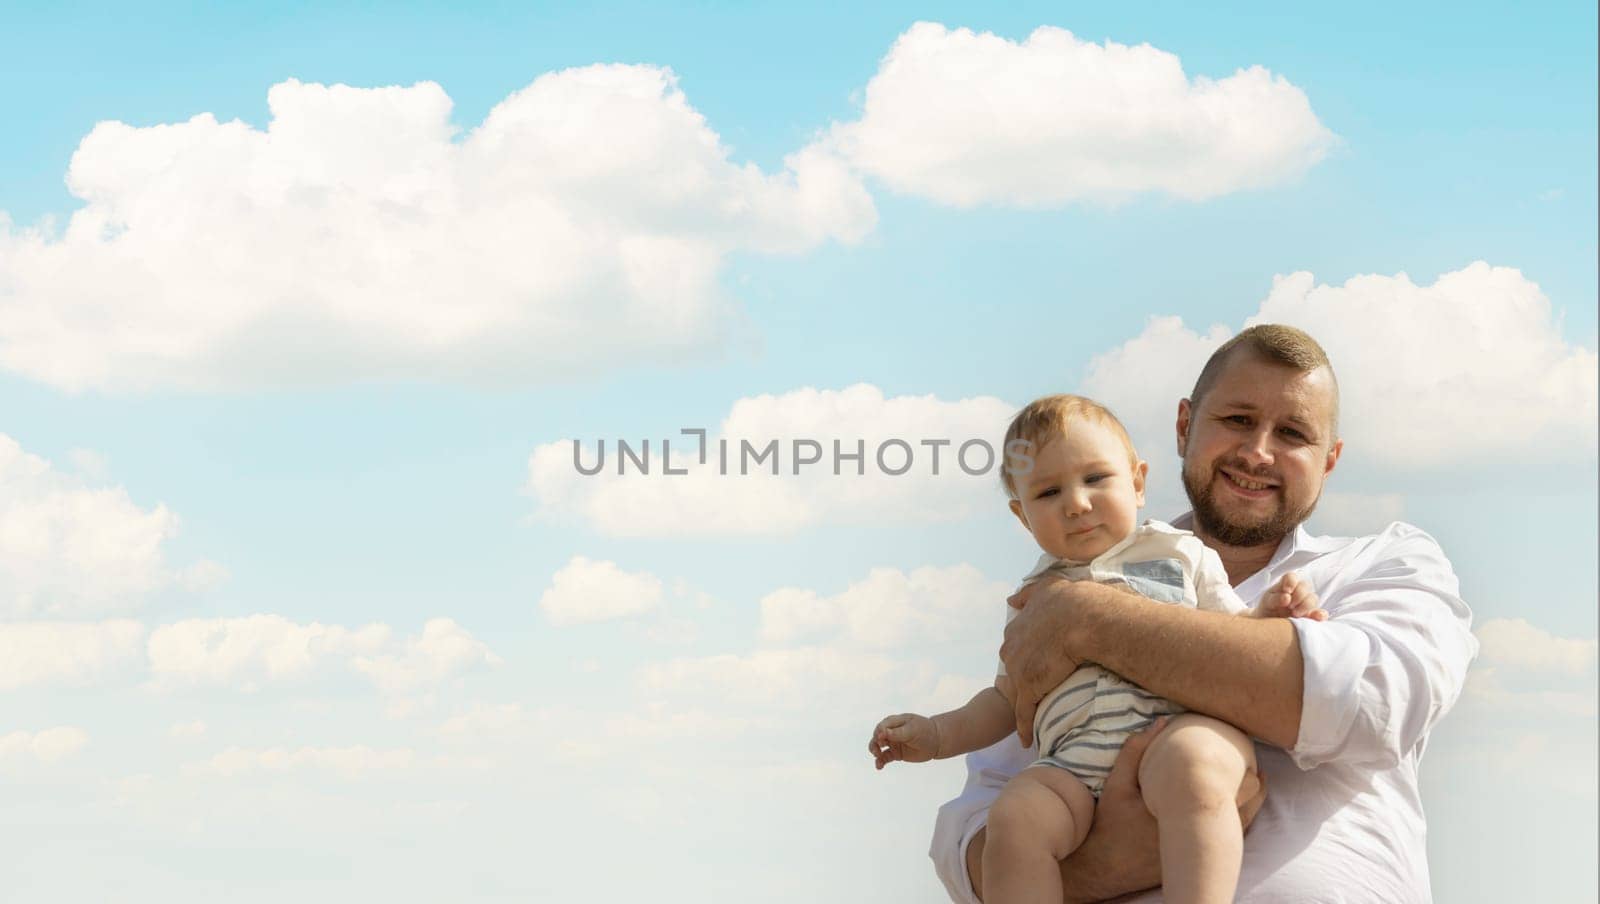 Happy father on vacation - man holding his little baby son on sky background. Portrait